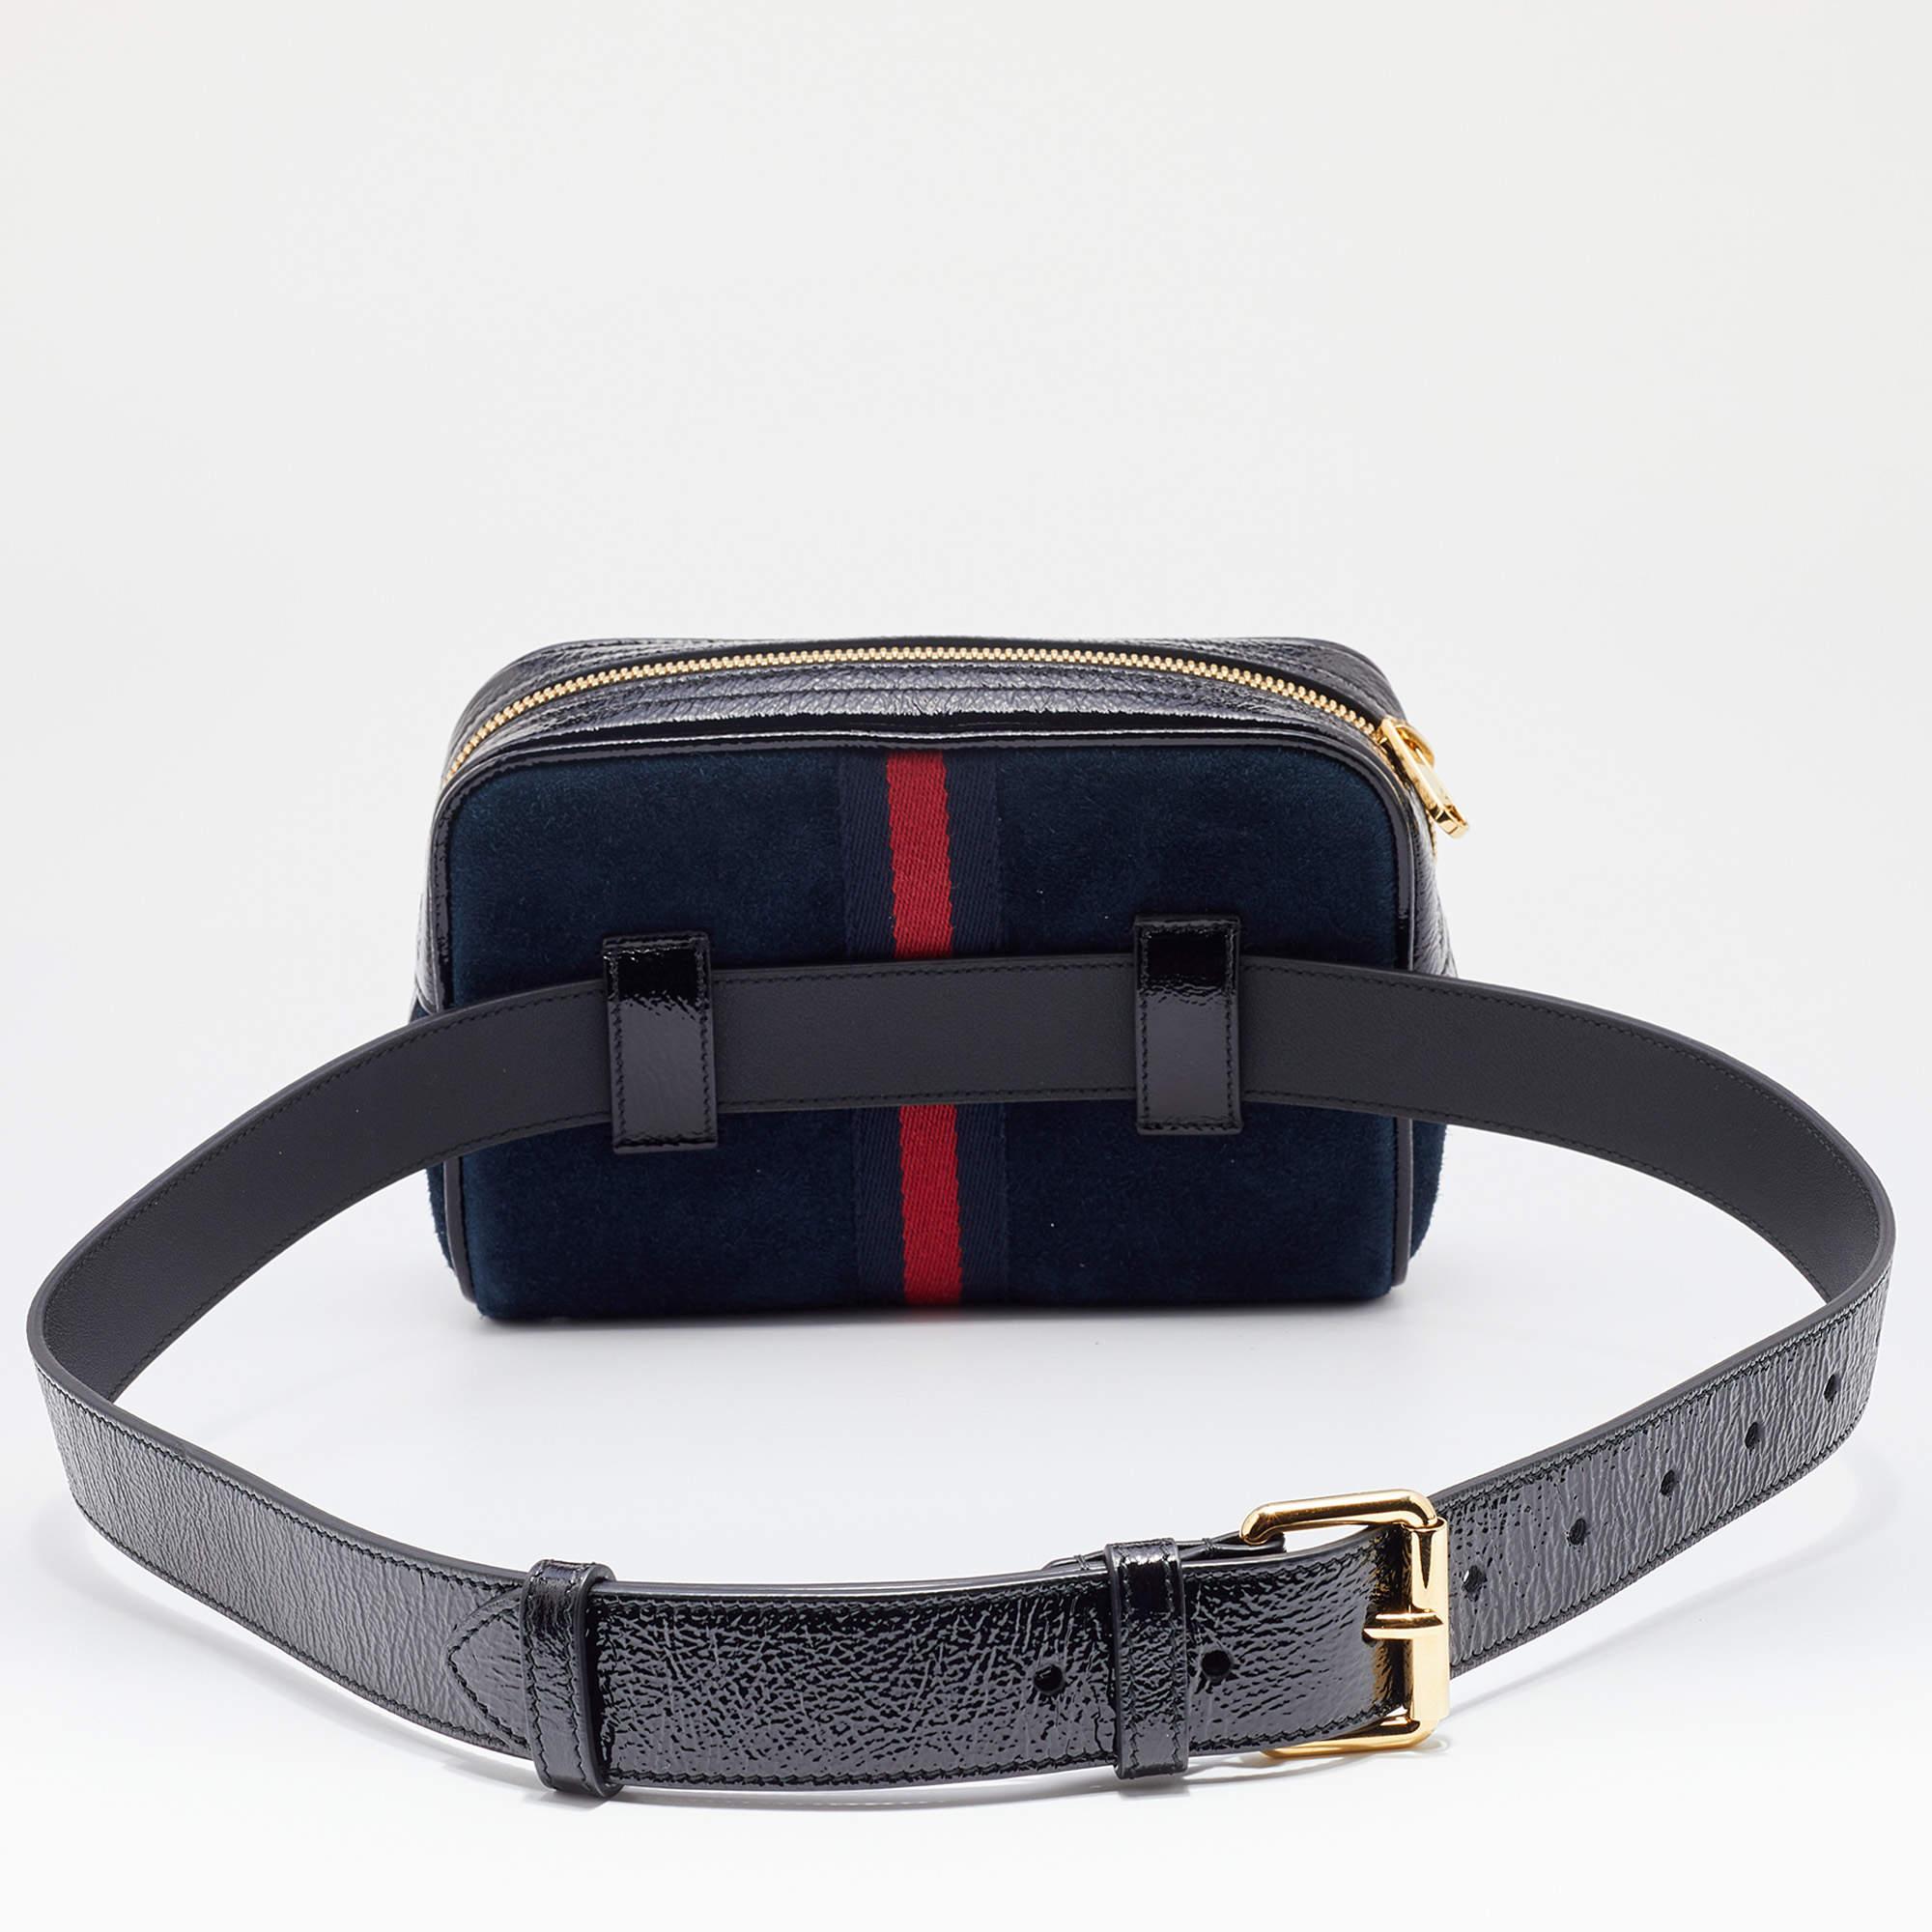 Transform your outfit with this Gucci Ophidia belt bag. It is made of suede and detailed with patent leather trims, the signature GG logo on the front, and Web trim detailing. It is complete with an adjustable belt strap.

Includes: Info Booklet,